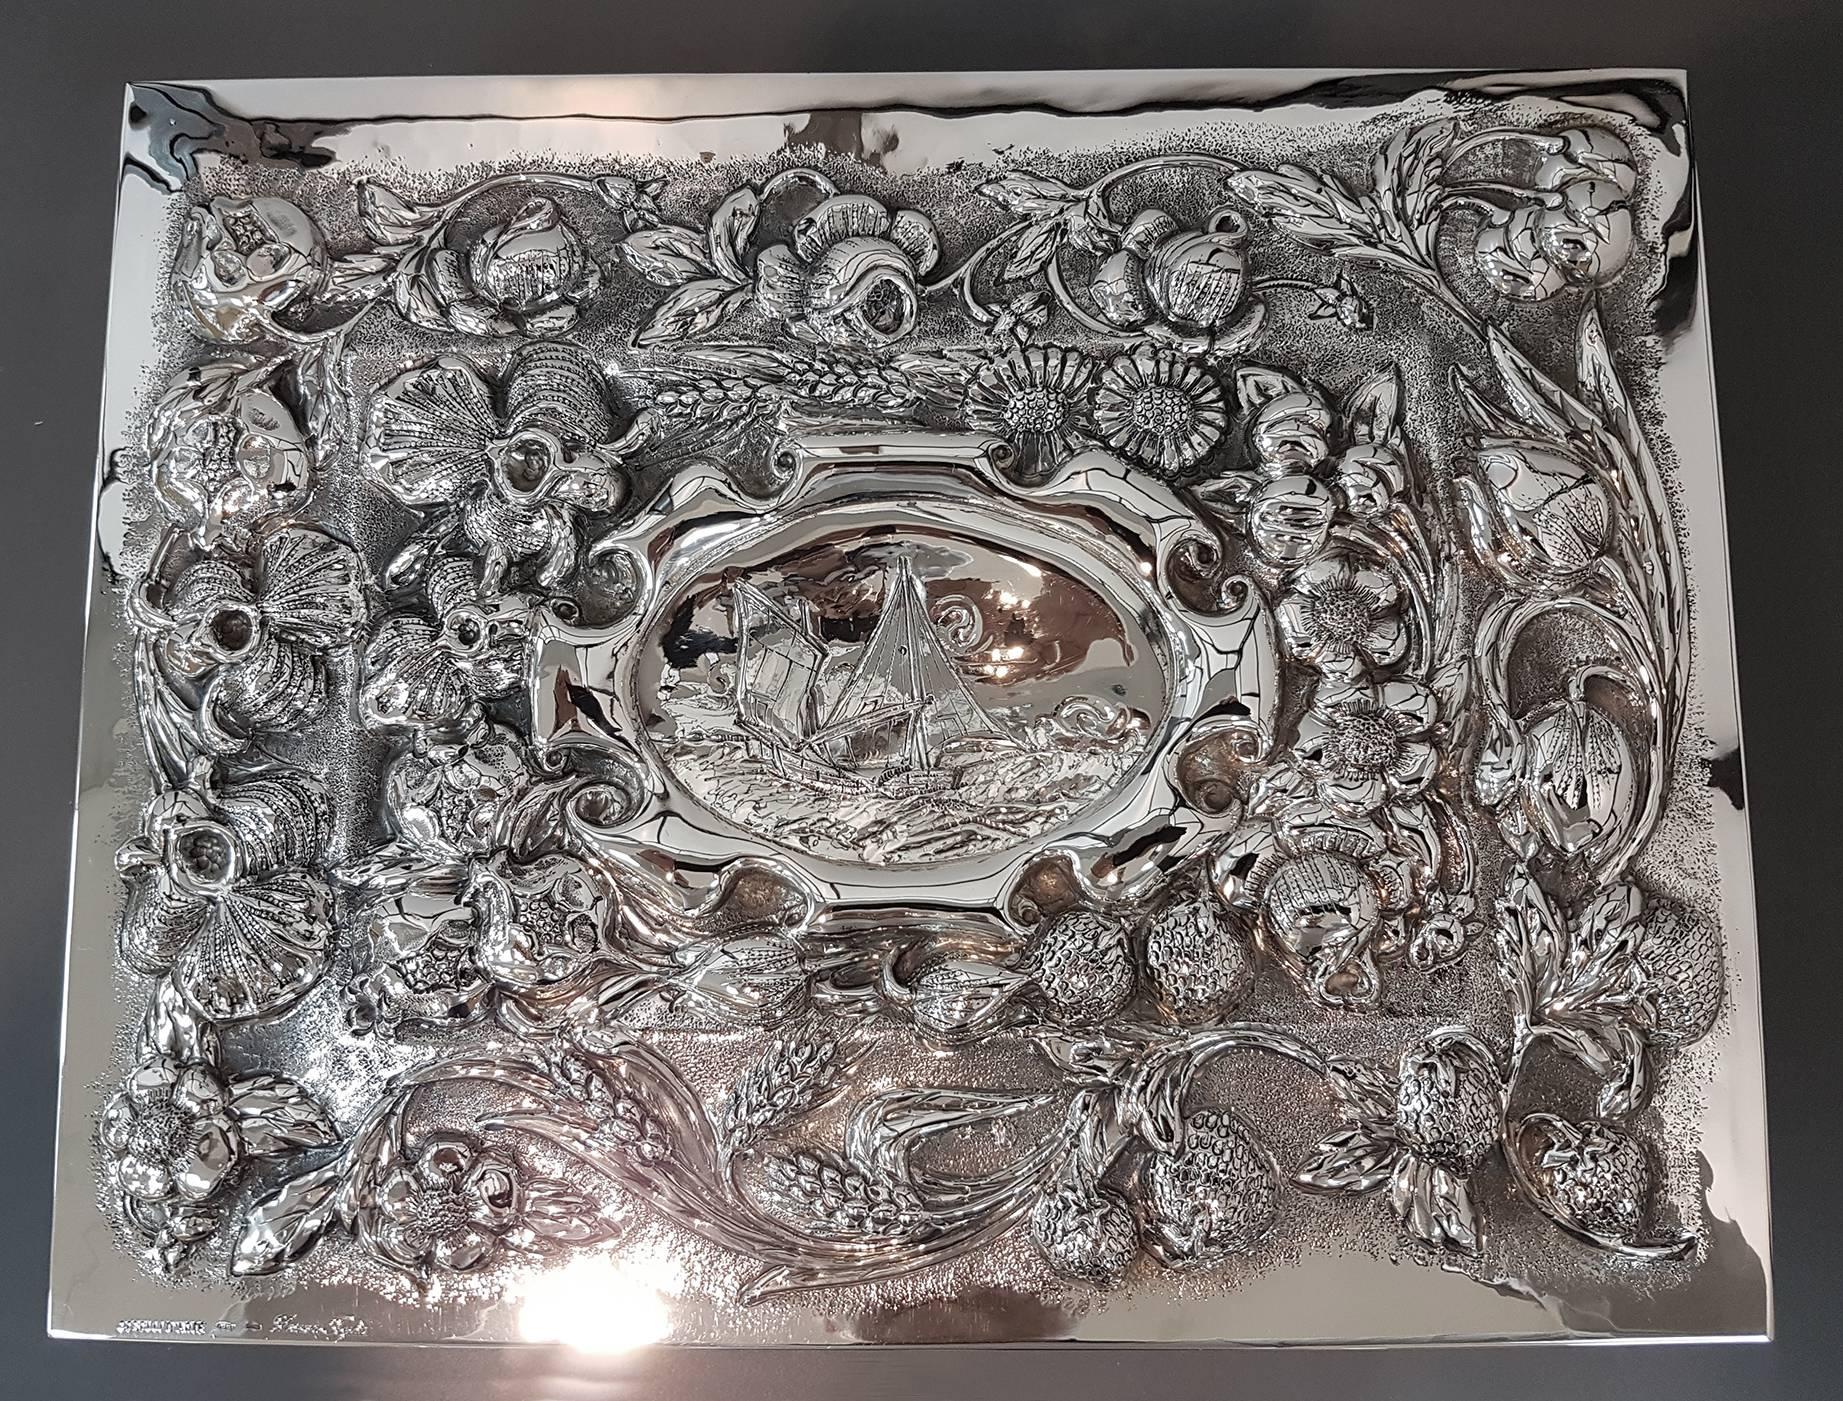 Rectangular solid silver 800°°/°°° table box.
The box is embossed by hand with flowers, leaves and fruits.
At the center of the hinged lid is embossed and engraved a sailing ship in a cartouche
The entire box was made entirely by hand.
The extensive